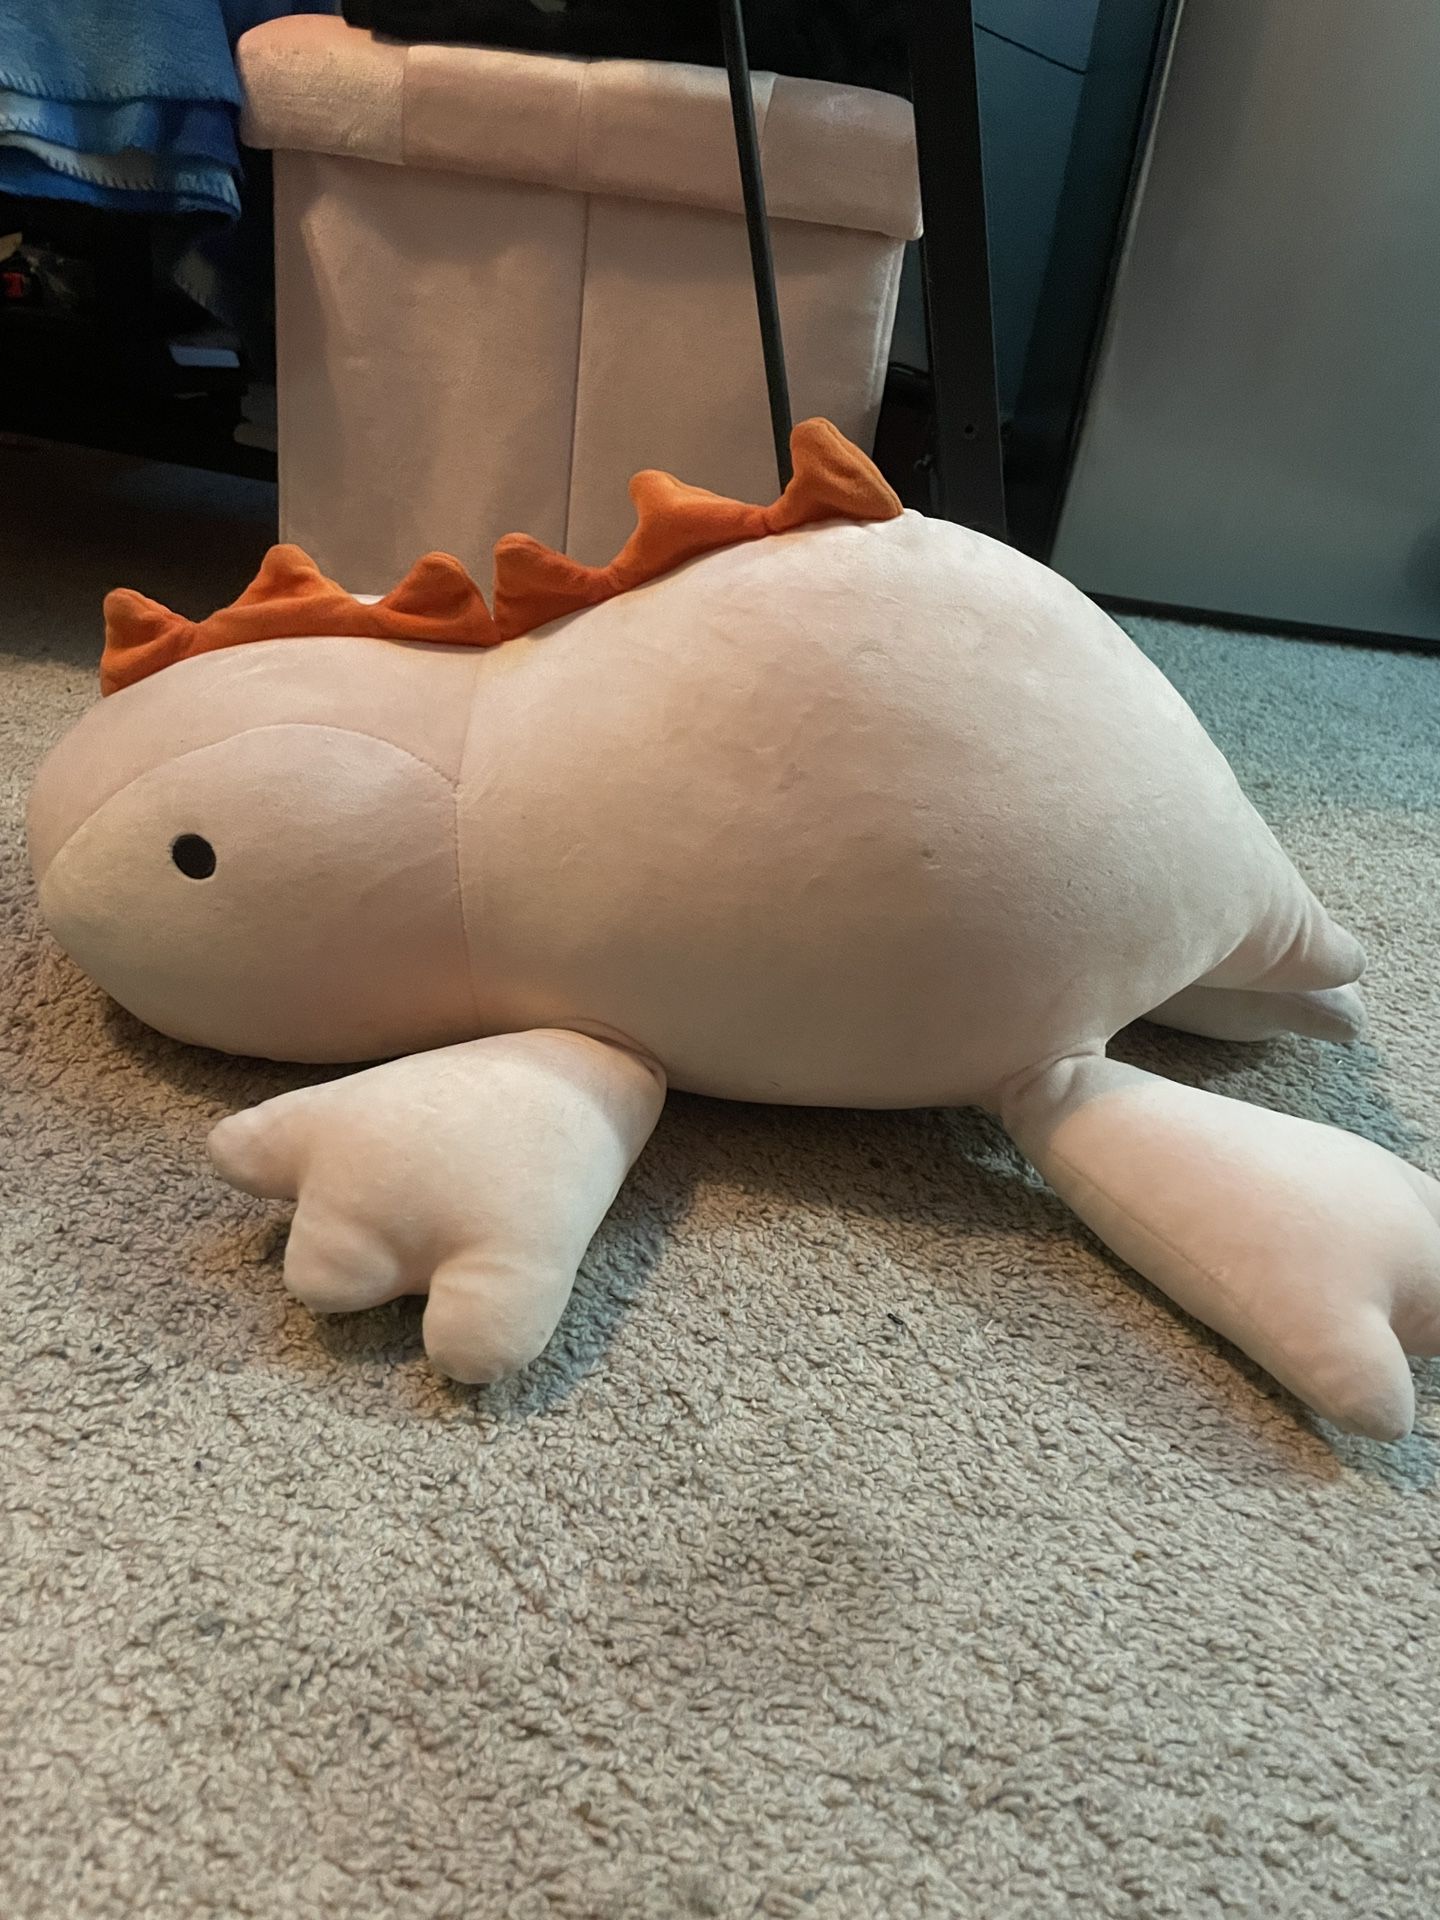 Large Weighted Stuffed Animal 